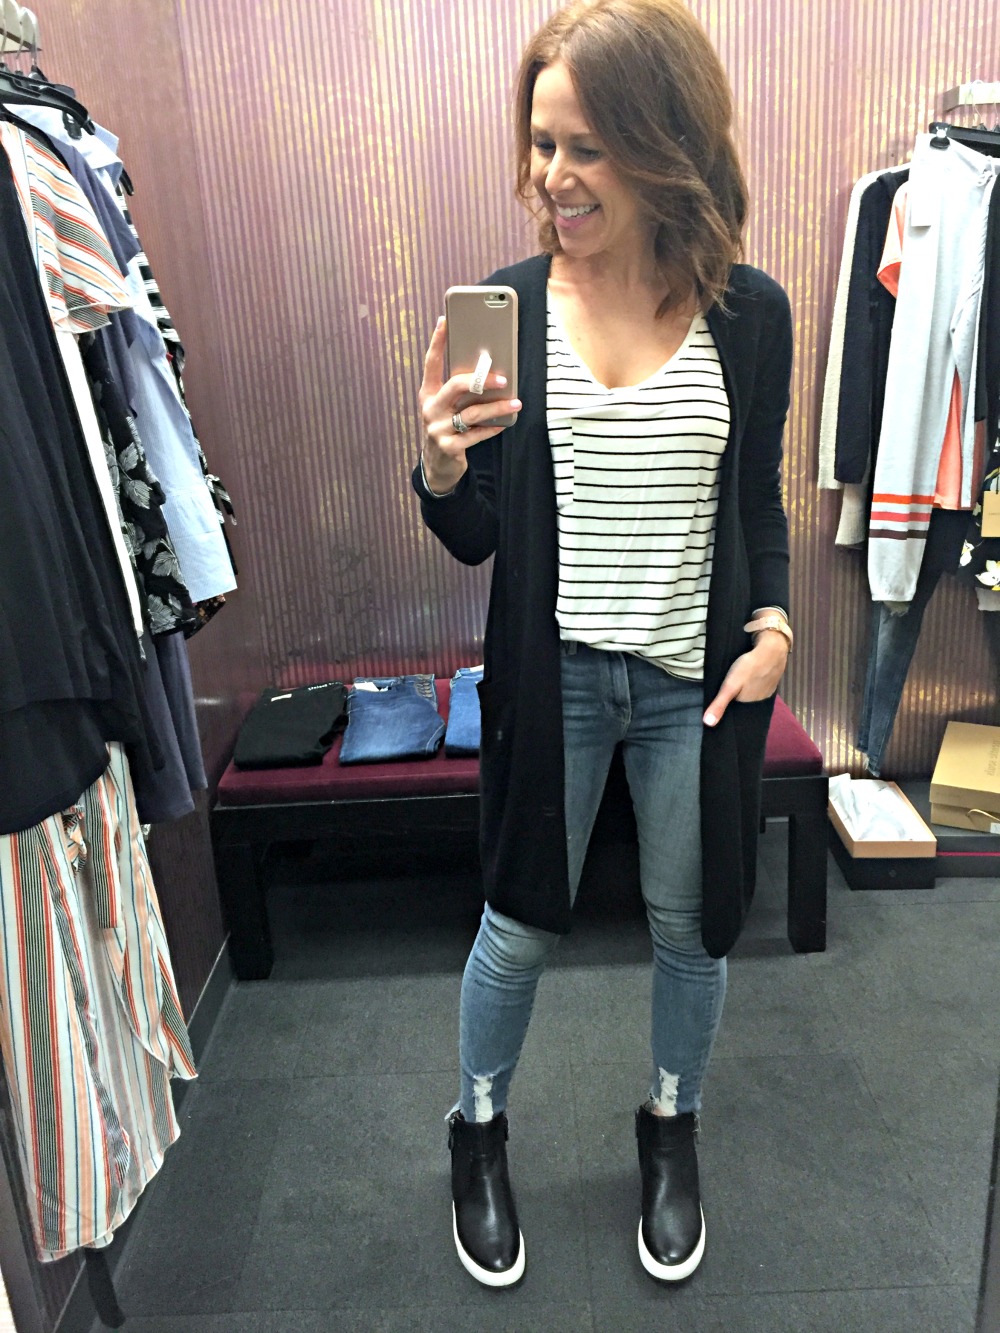 Nordstrom Anniversary sale 2017 // The Modern Savvy shares her 50 top finds, plus lots of dressing room selfies to see how everything looks on a real girl - Nordstrom Anniversary Sale Top 50 Picks featured by popular Florida style blogger, The Modern Savvy